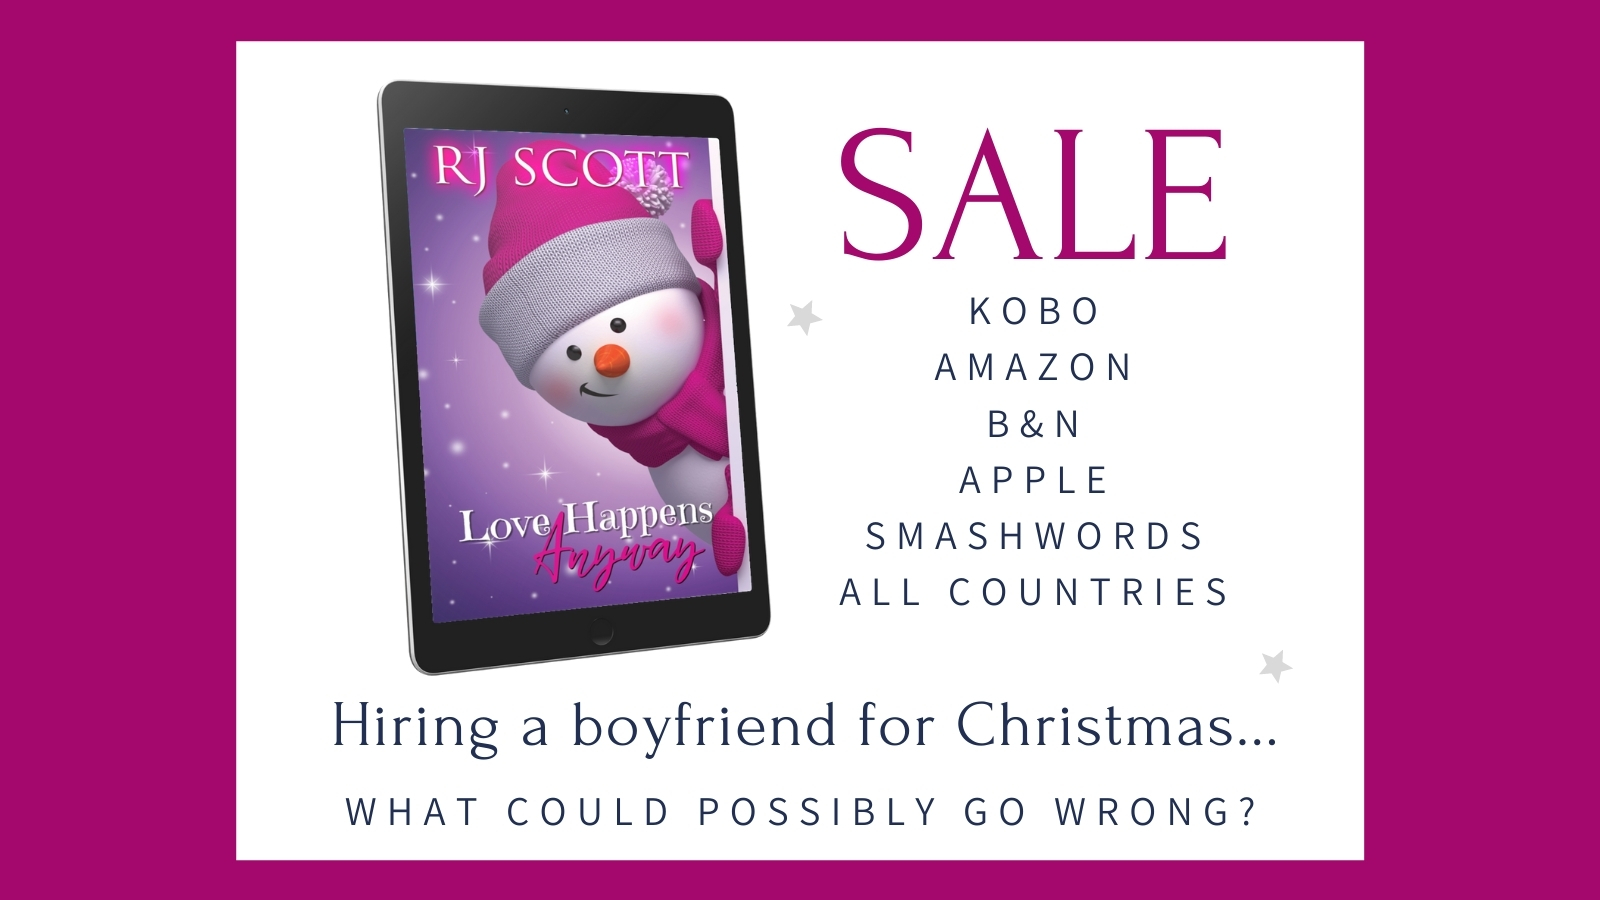 Love Happens Anyway MM Romance RJ Scott Christmas Sale at only 99c